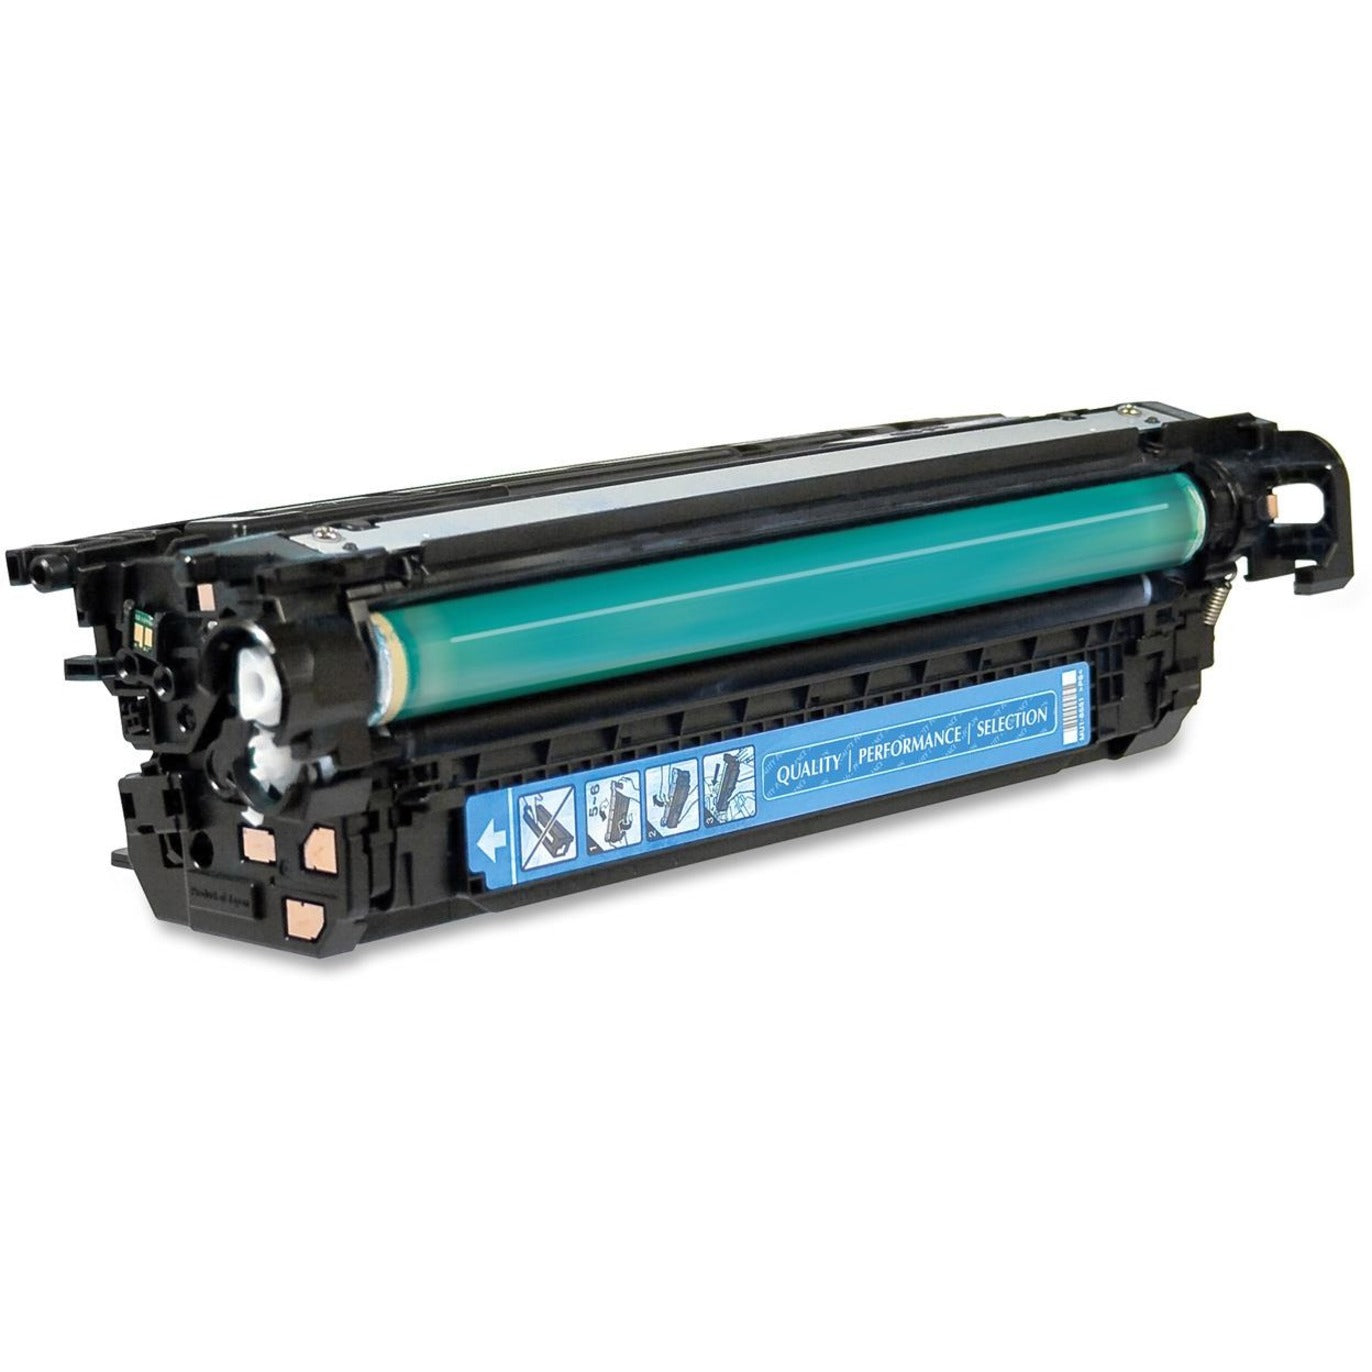 West Point 200241P Remanufactured HPCE261A Toner Cartridge, Cyan, 11,000 Page Yield